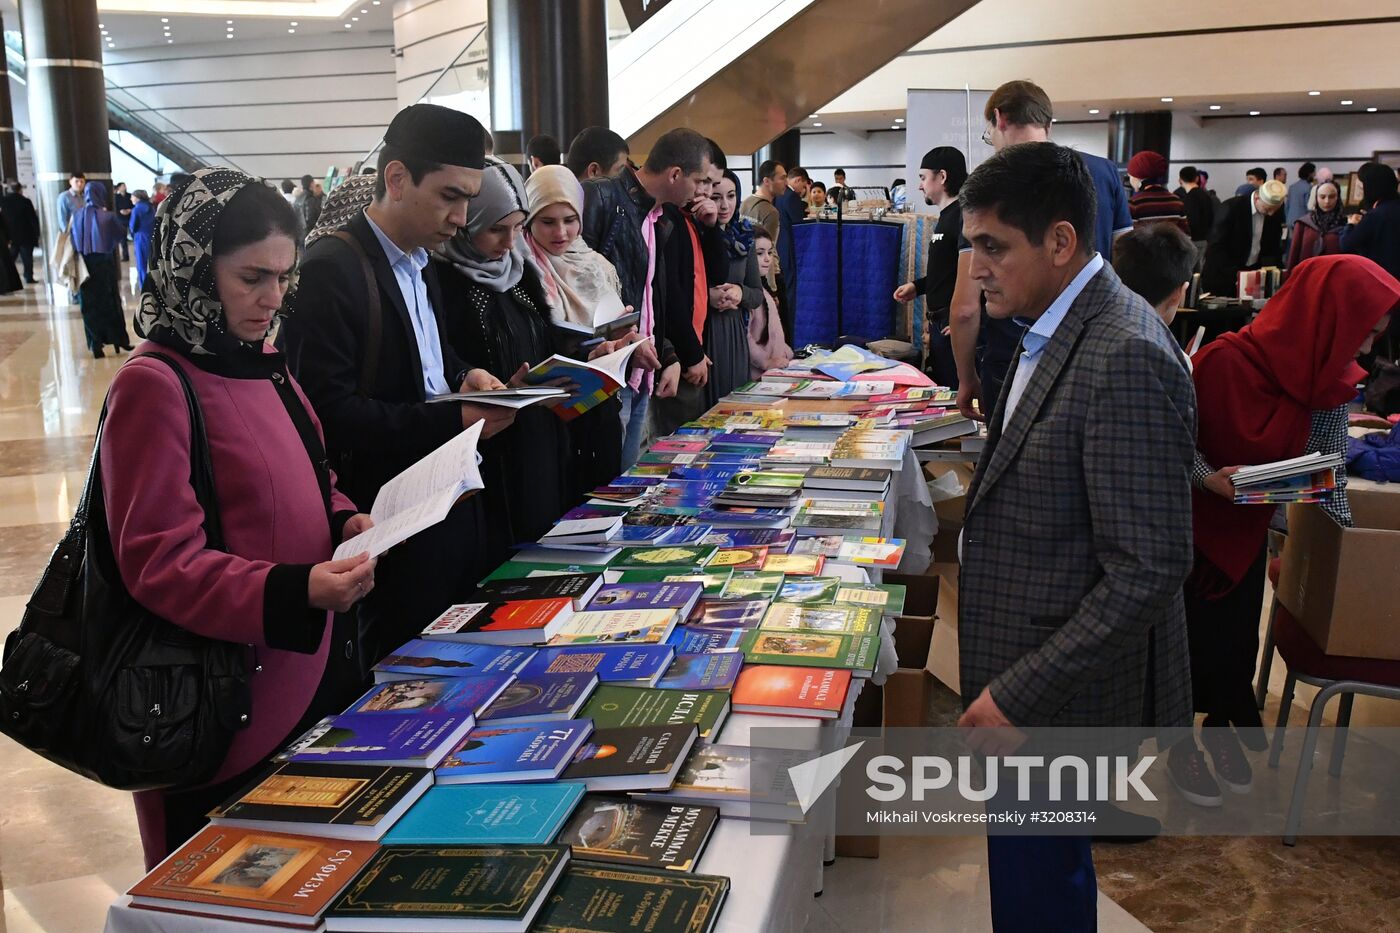 18th Moscow International Quran Reciting Competition